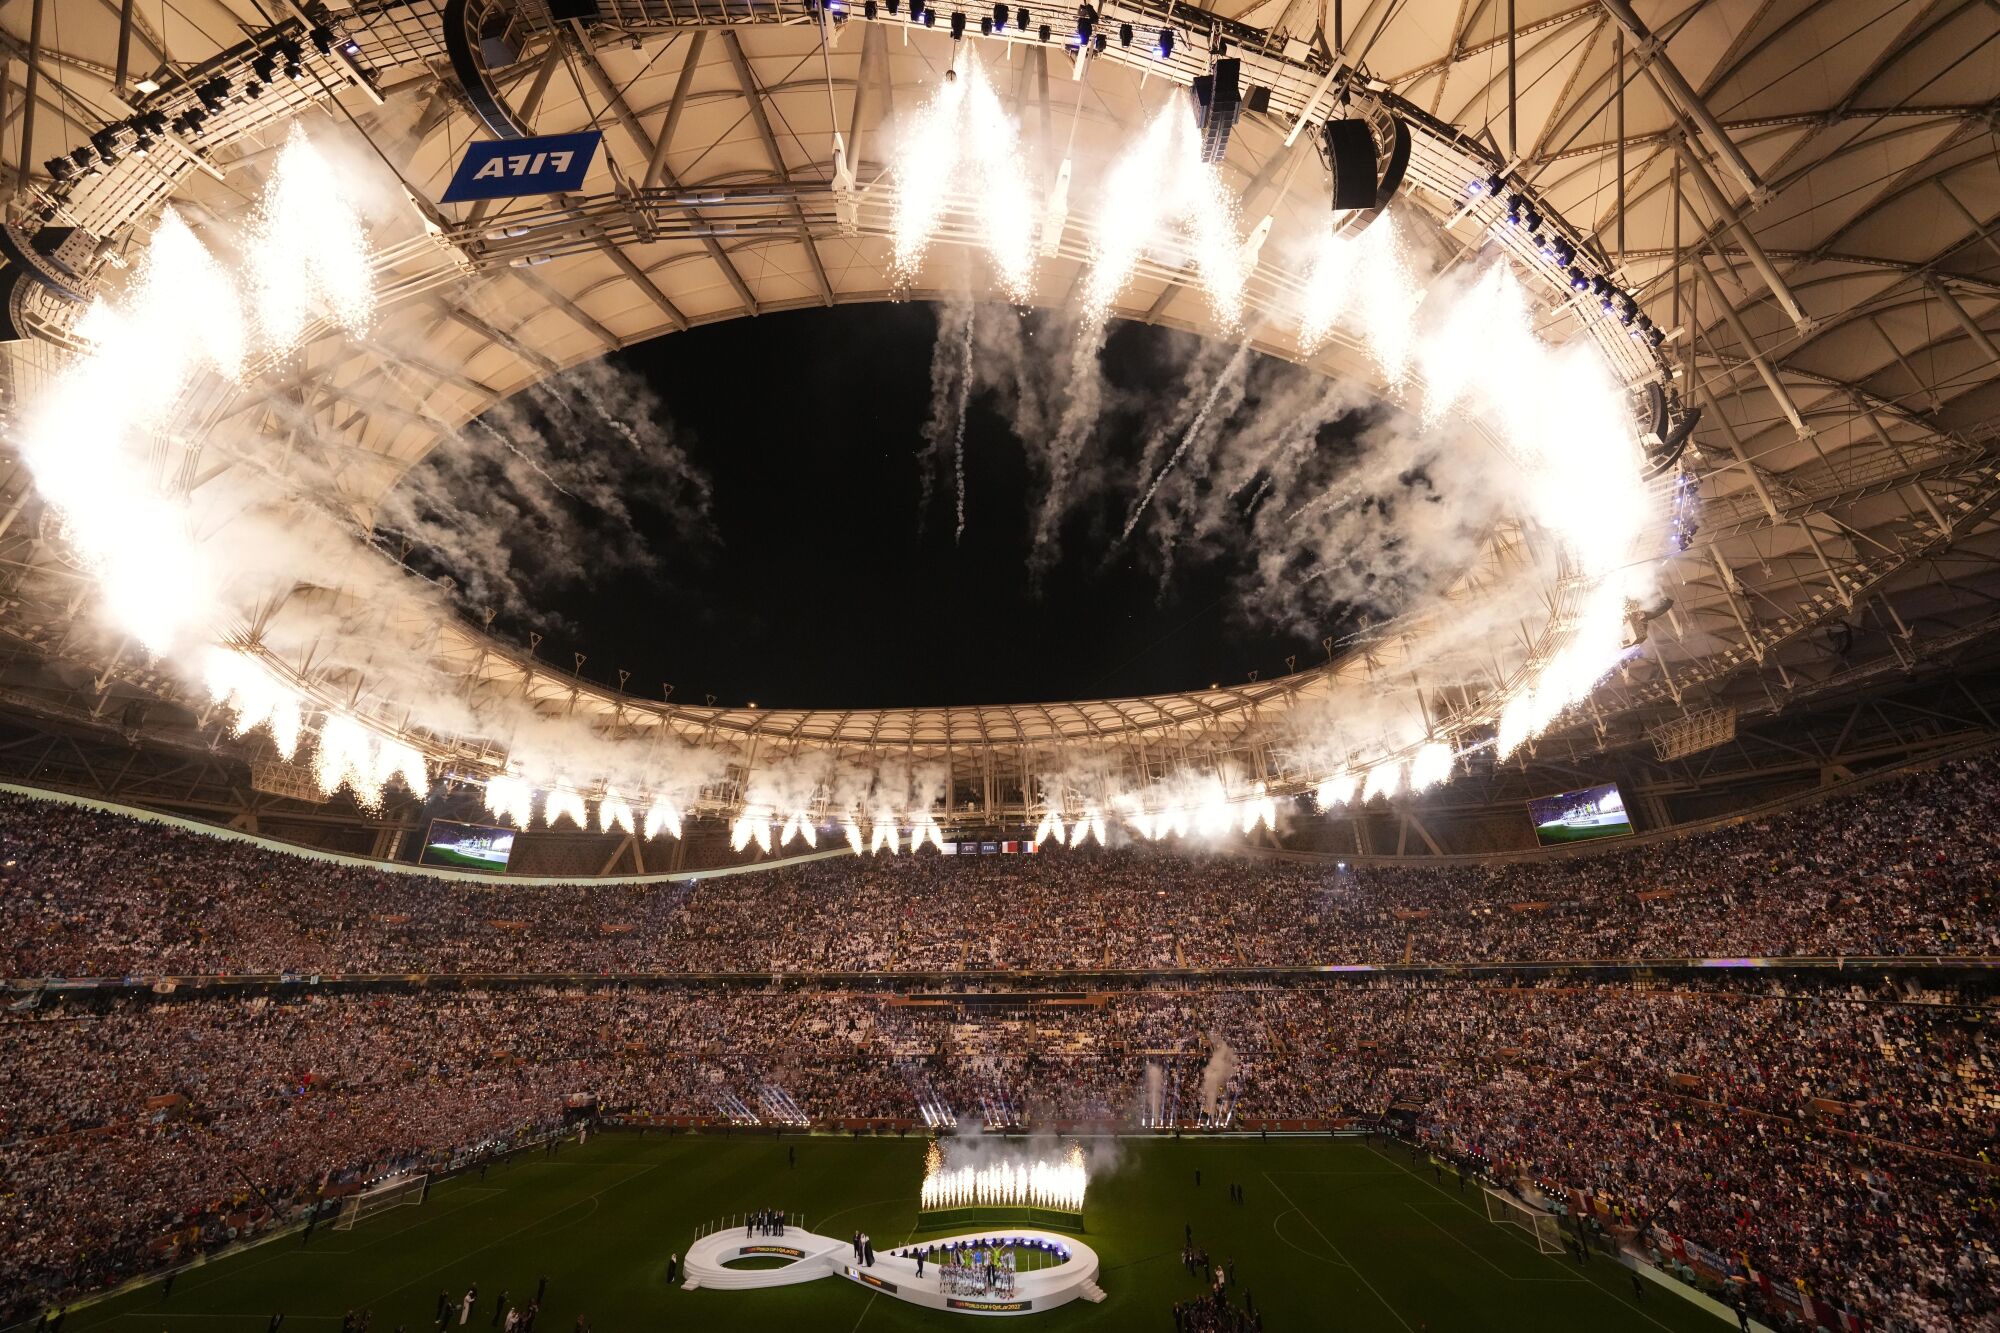 Fireworks explode as Argentina's team receives the trophy.